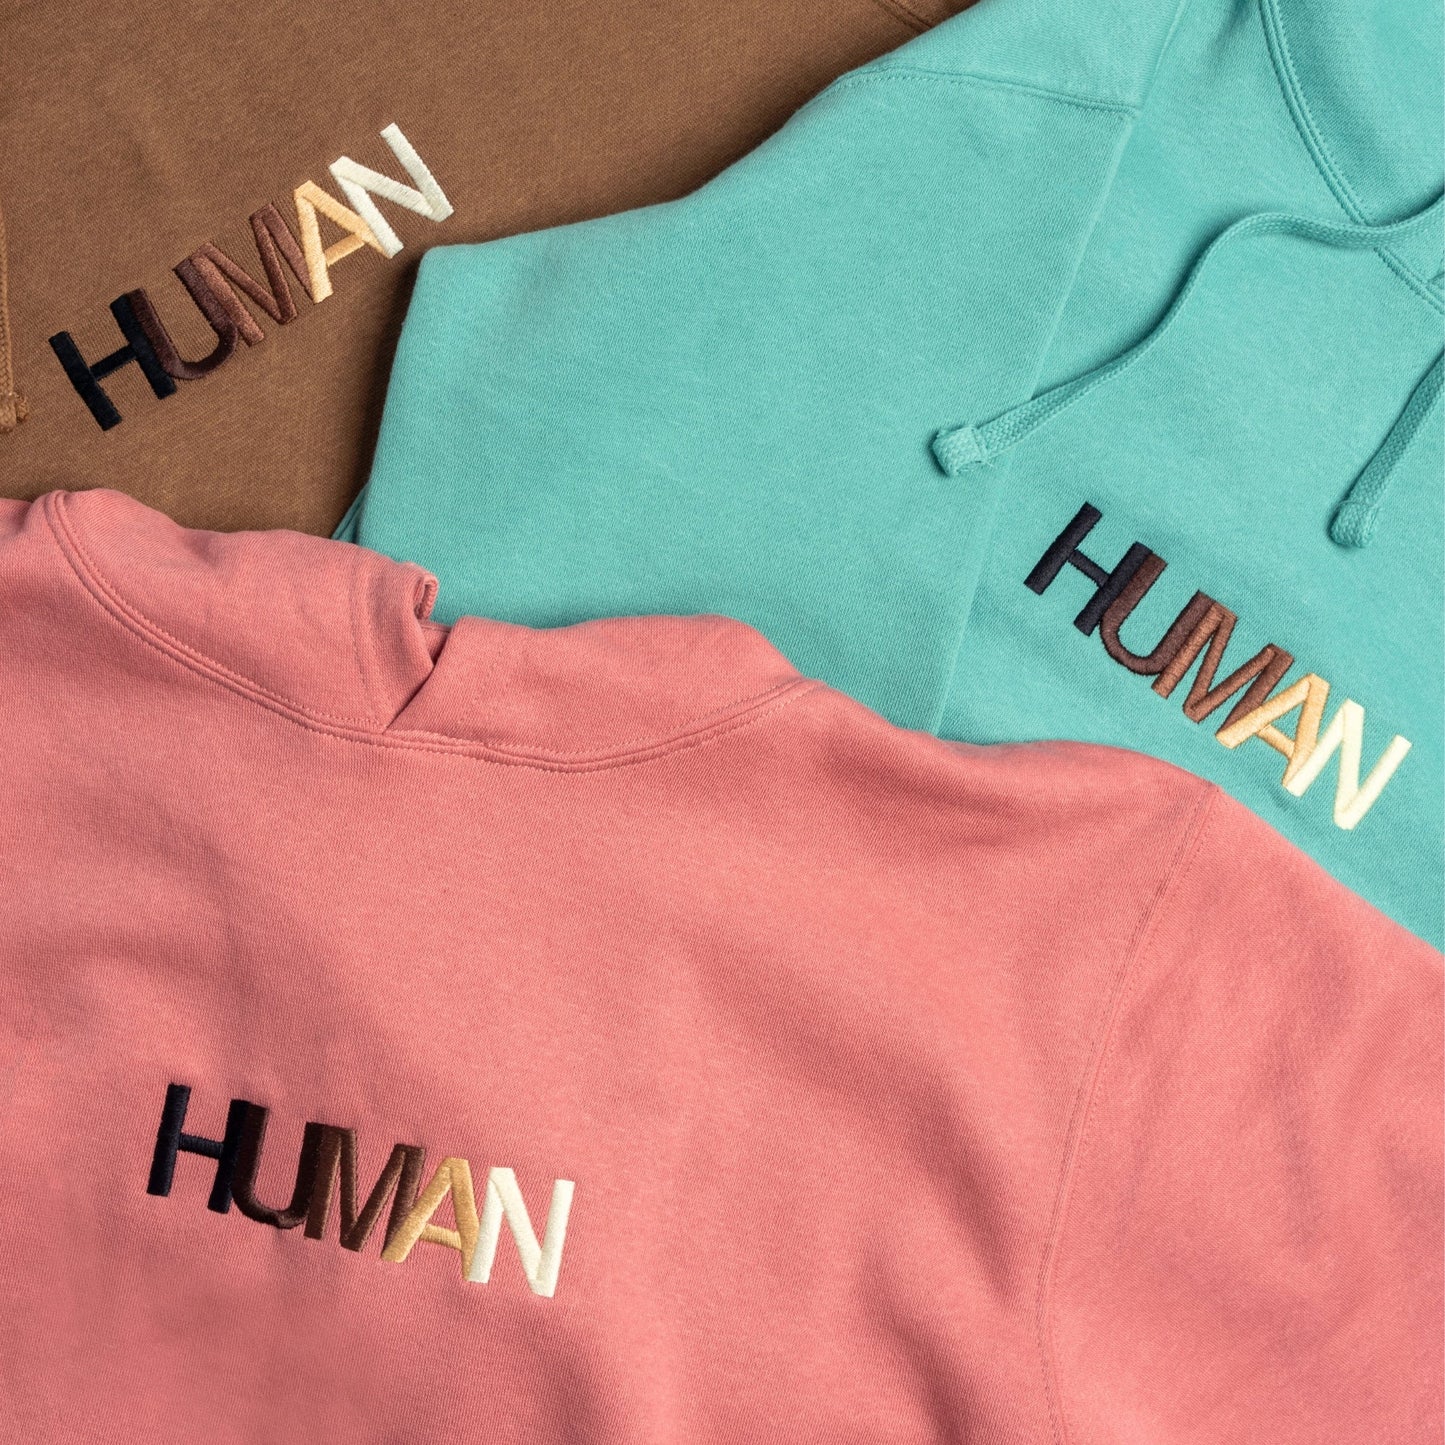 Human Embroidered Hoodie | We Are All Human – Wear The Peace